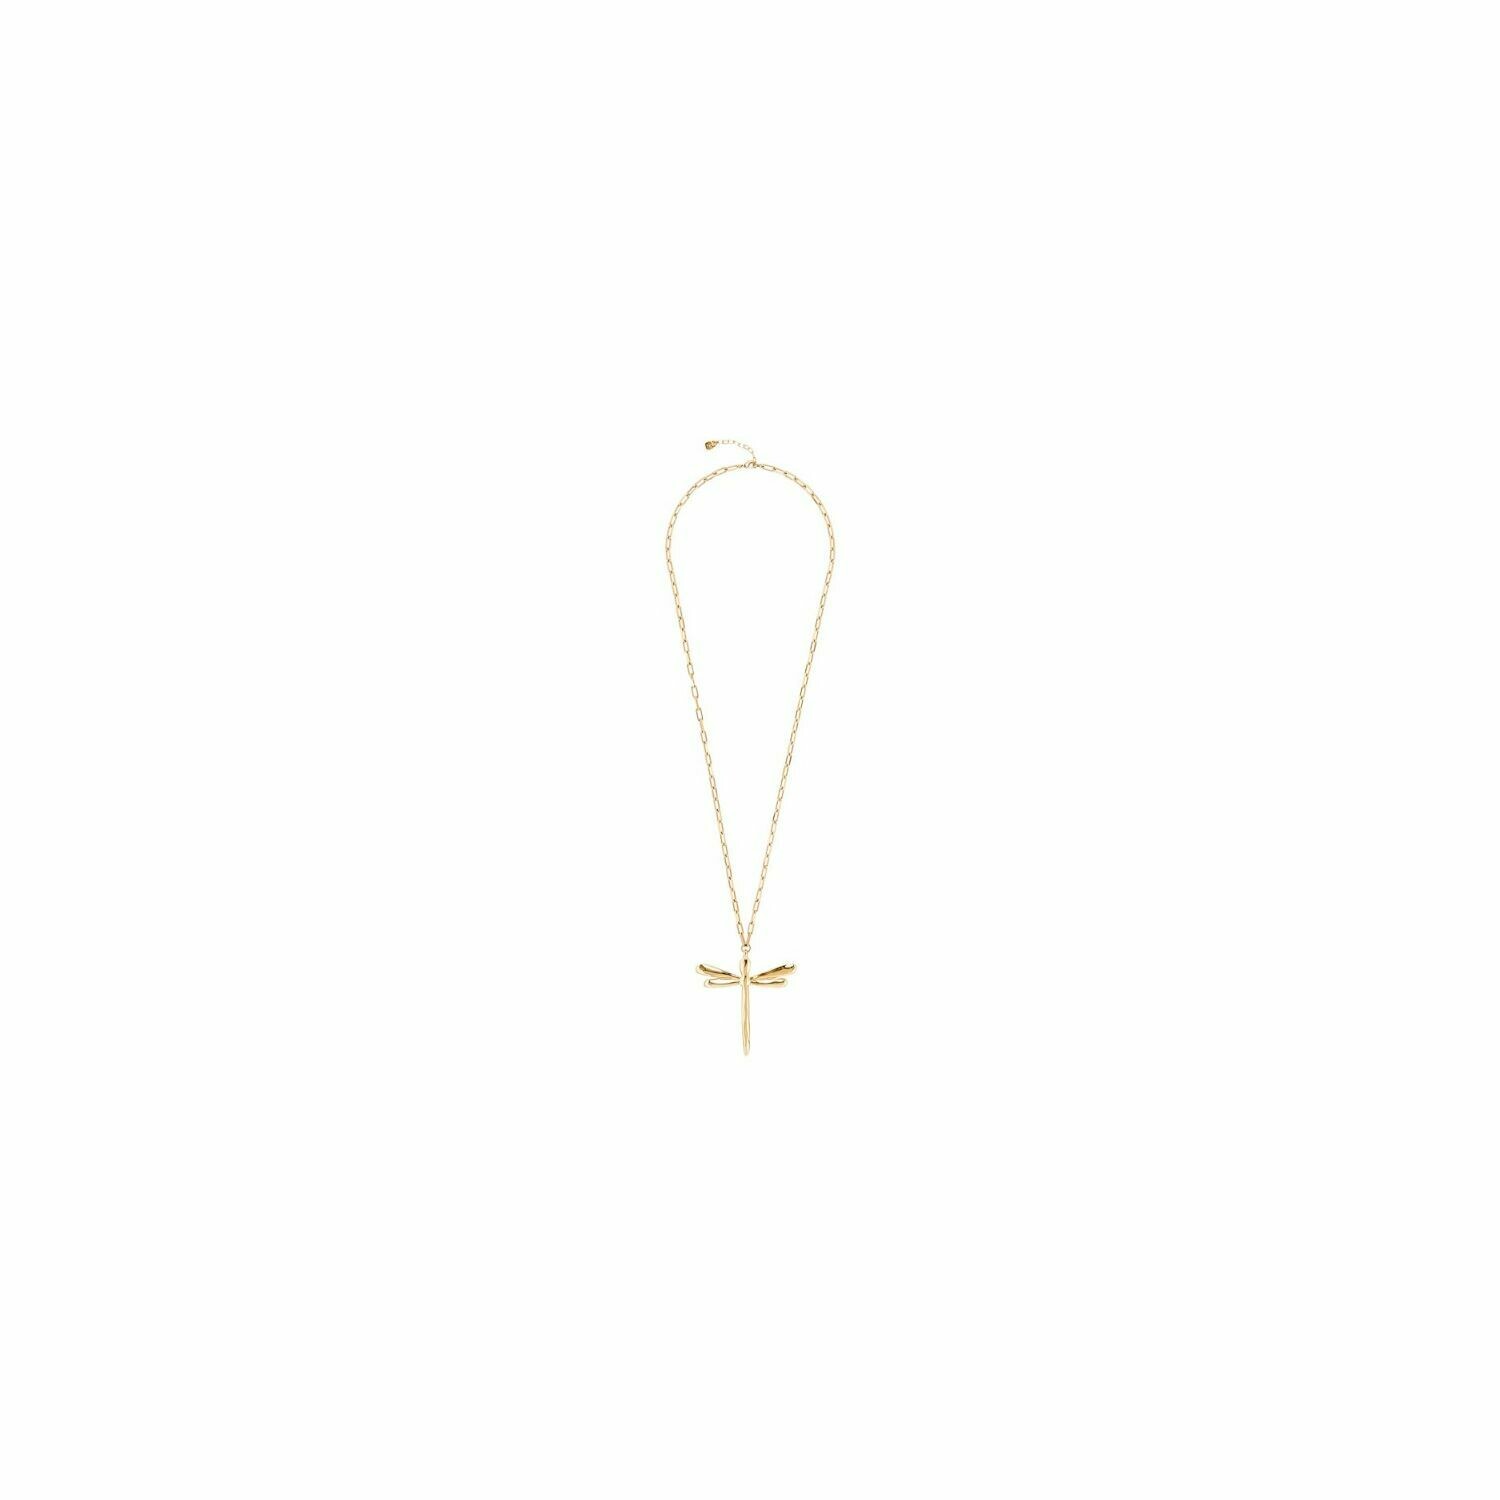 Take-Me Gold Necklace